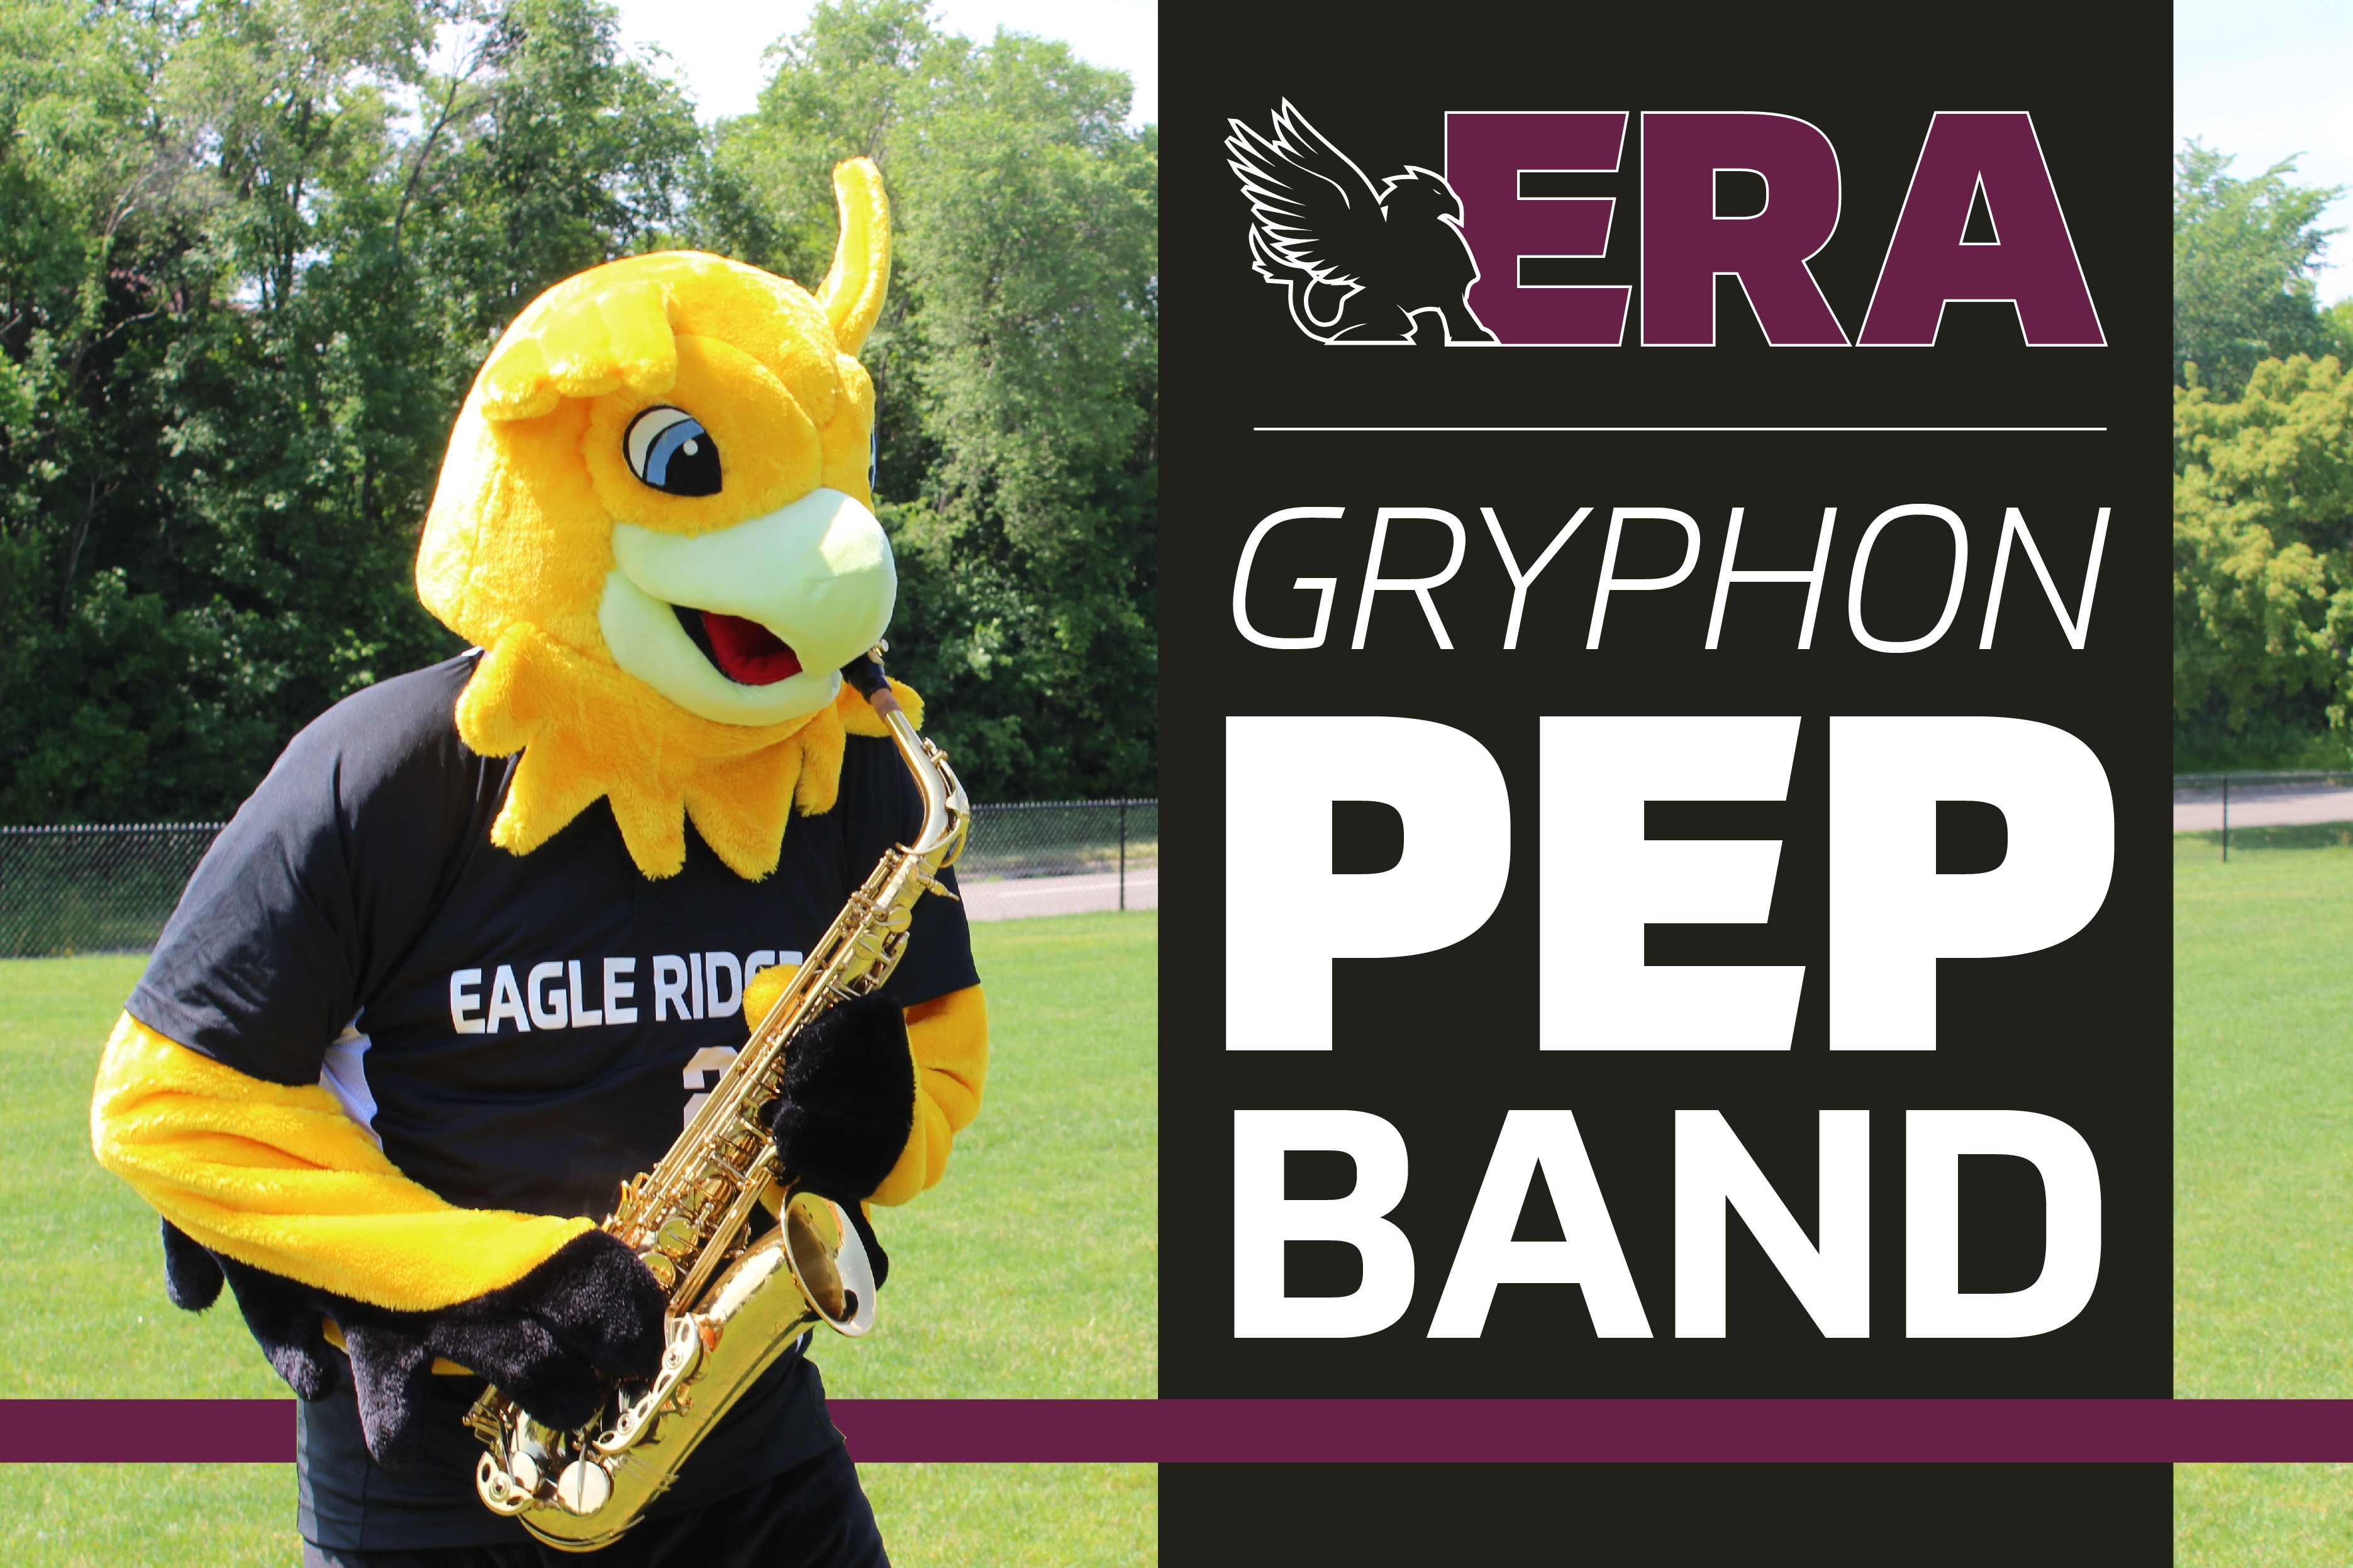 Gryphon playing the saxophone with text ERA Gryphon Pep Band